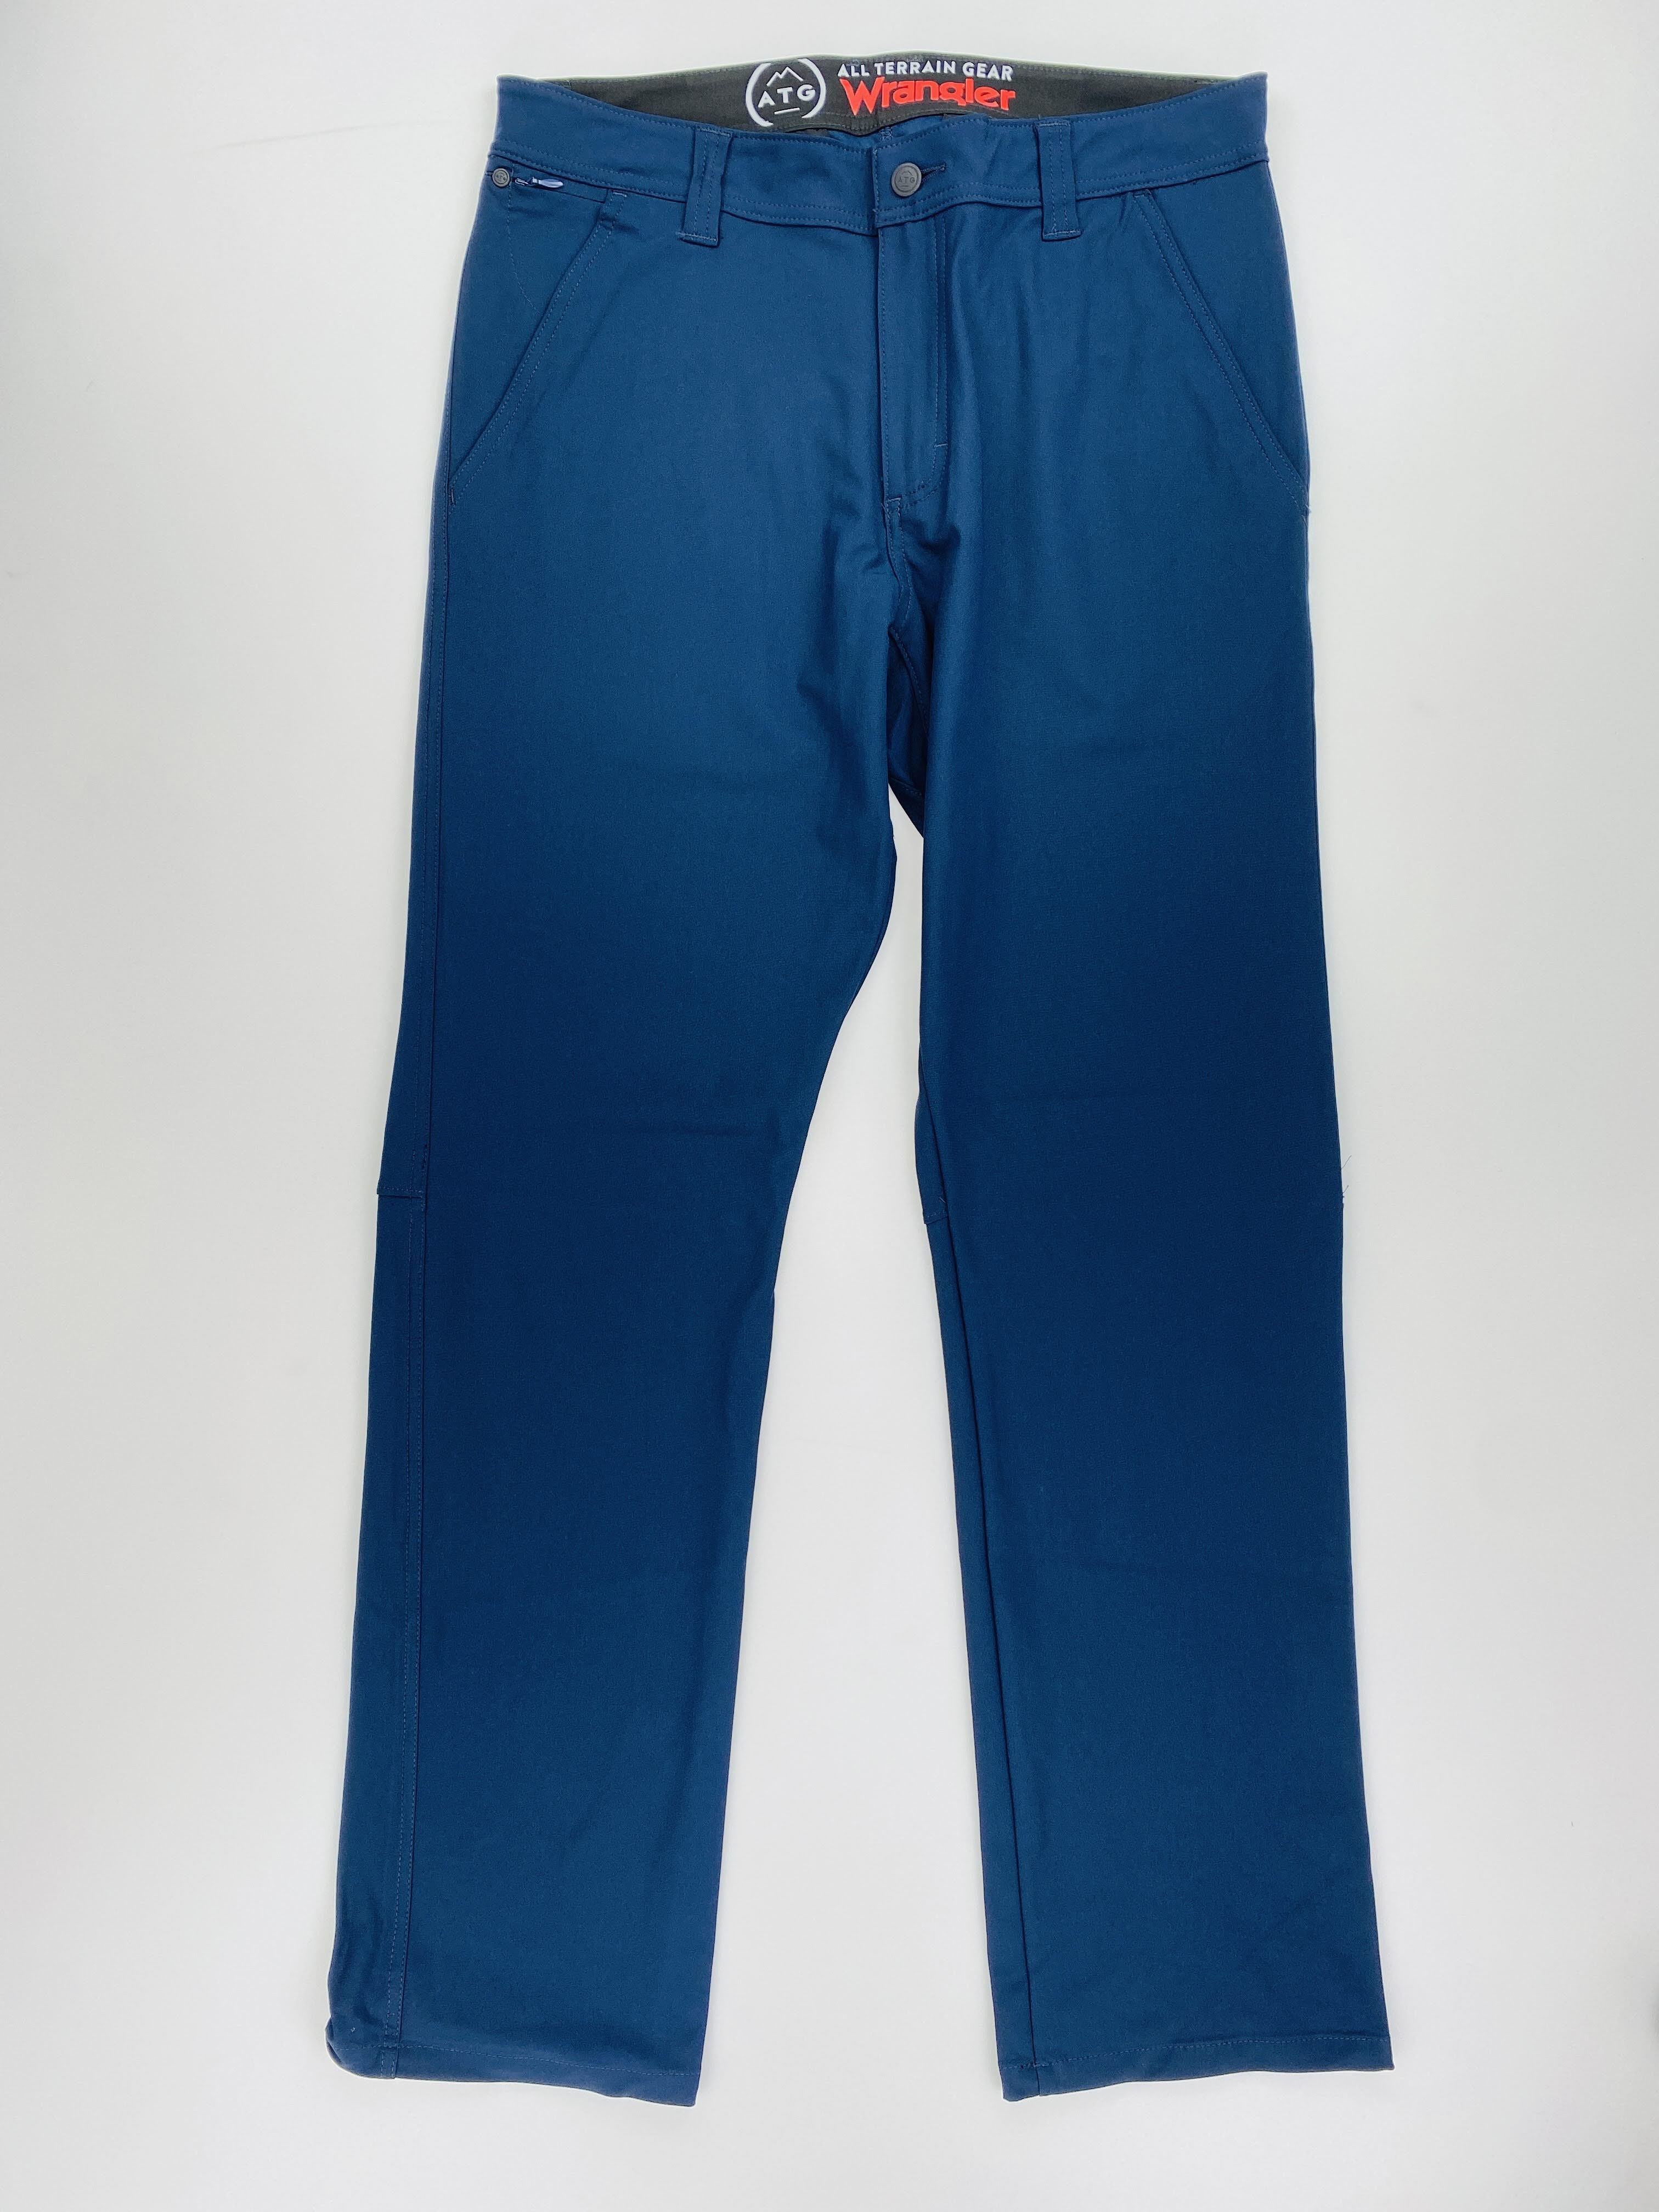 Wrangler Fwds Chino Pant - Second Hand Walking trousers - Women's - Blue - US 28 | Hardloop